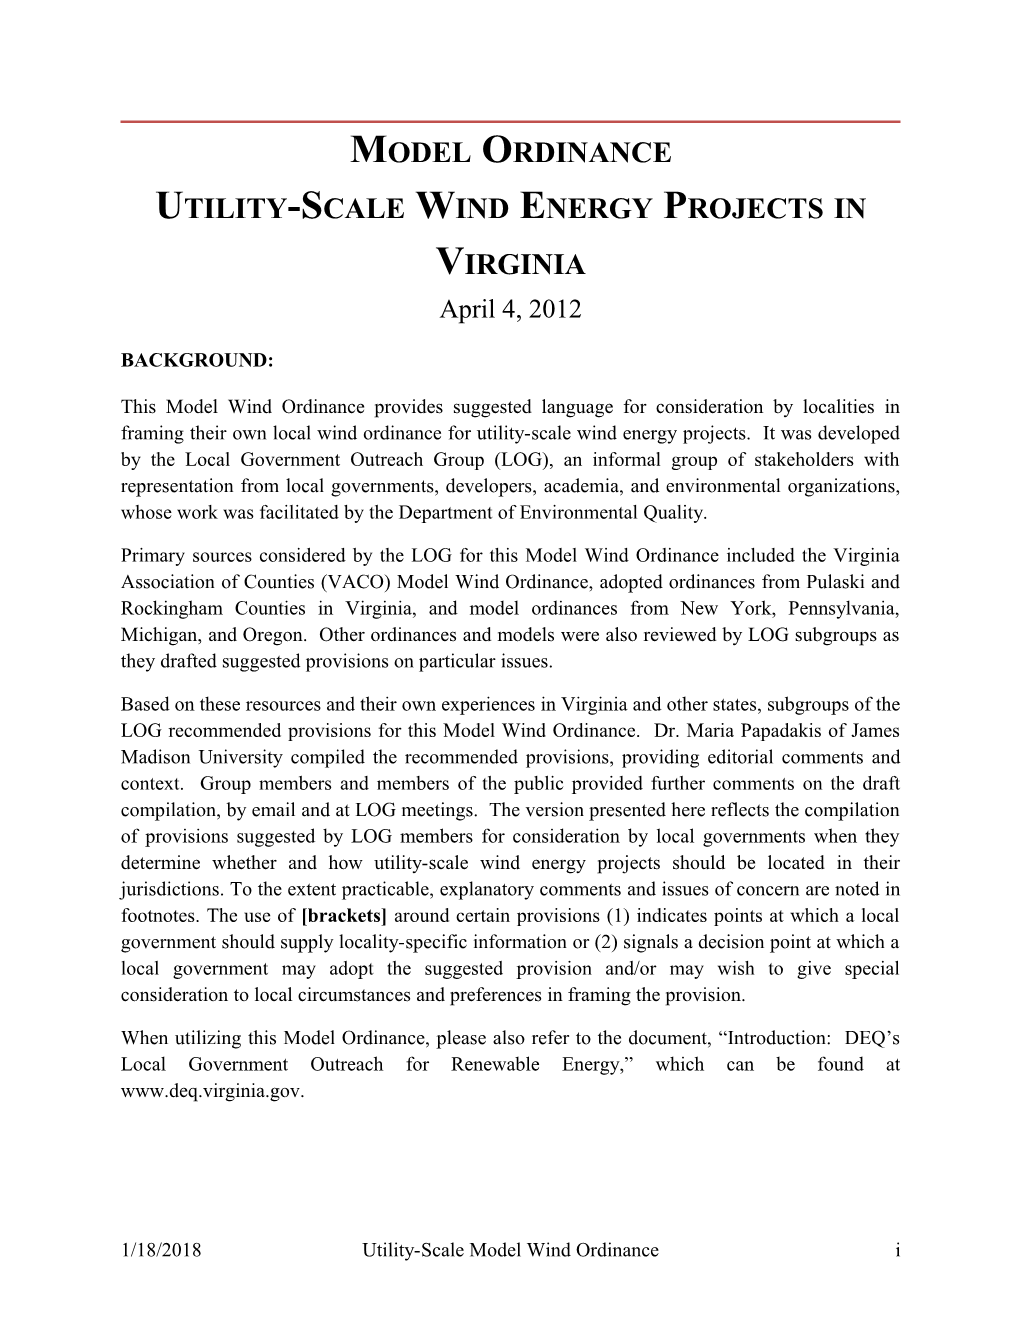 Utility-Scale Wind Energy Projects